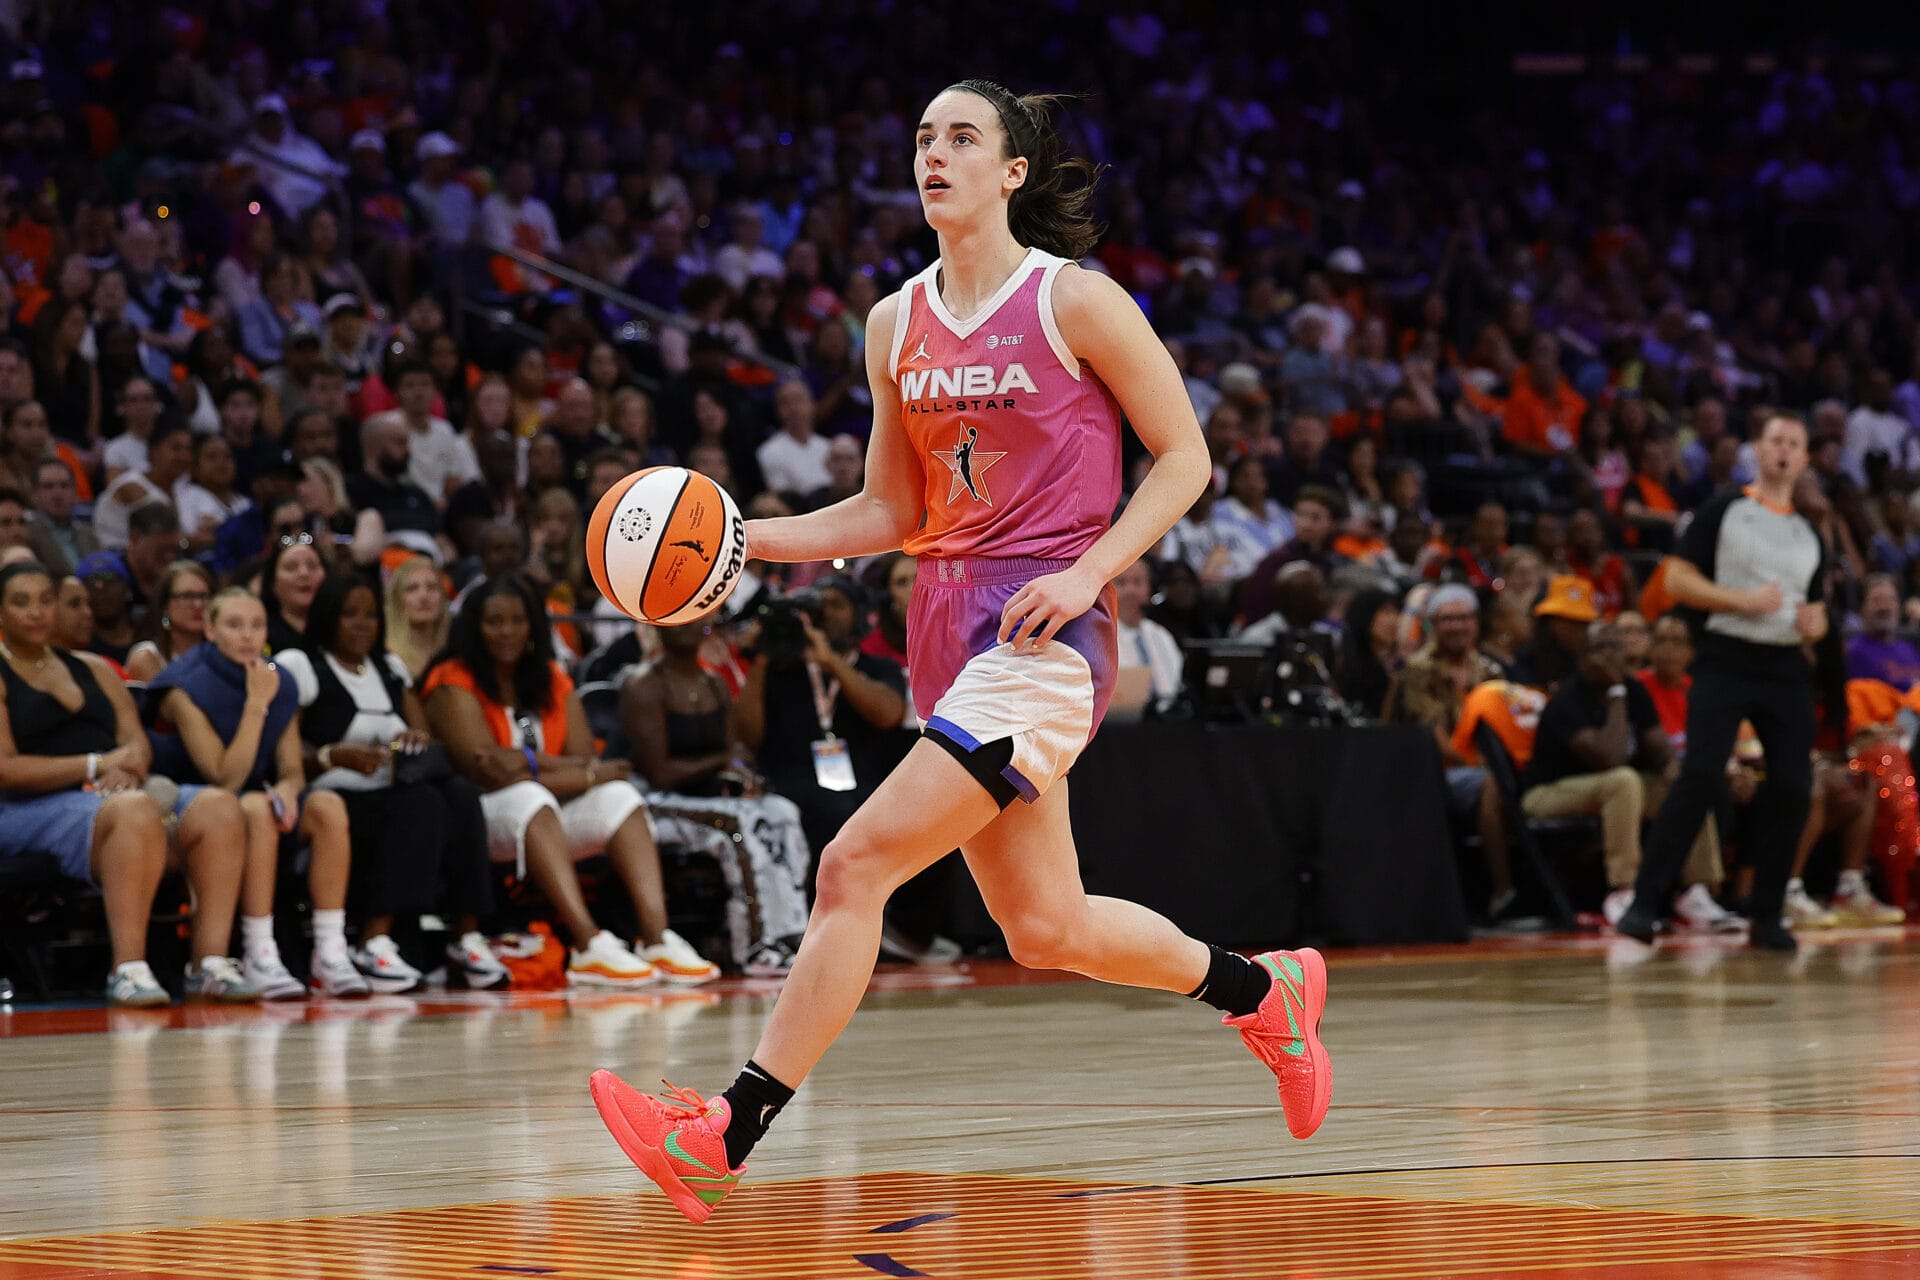 Caitlin Clark #22 of Team WNBA drives down the court during the second quarter of the 2024 WNBA All Star Game at Footprint Center on July 20, 2024 in Phoenix, Arizona. (Photo by Alex Slitz/Getty Images)